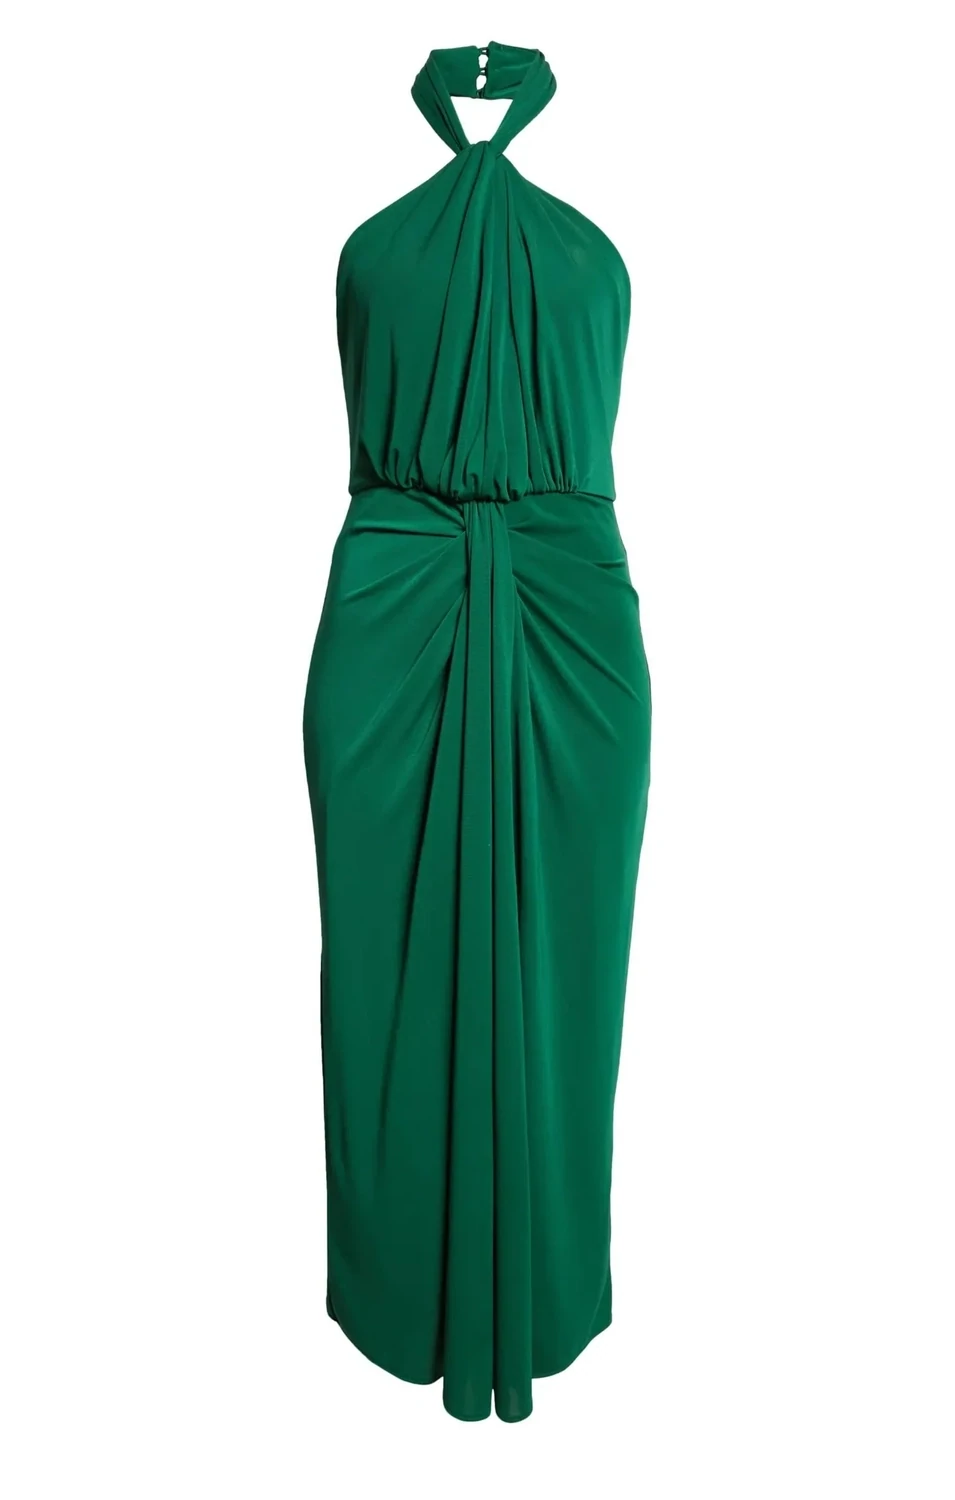 Cinq a Sept Kaily Dress in Malachite, Size: 4